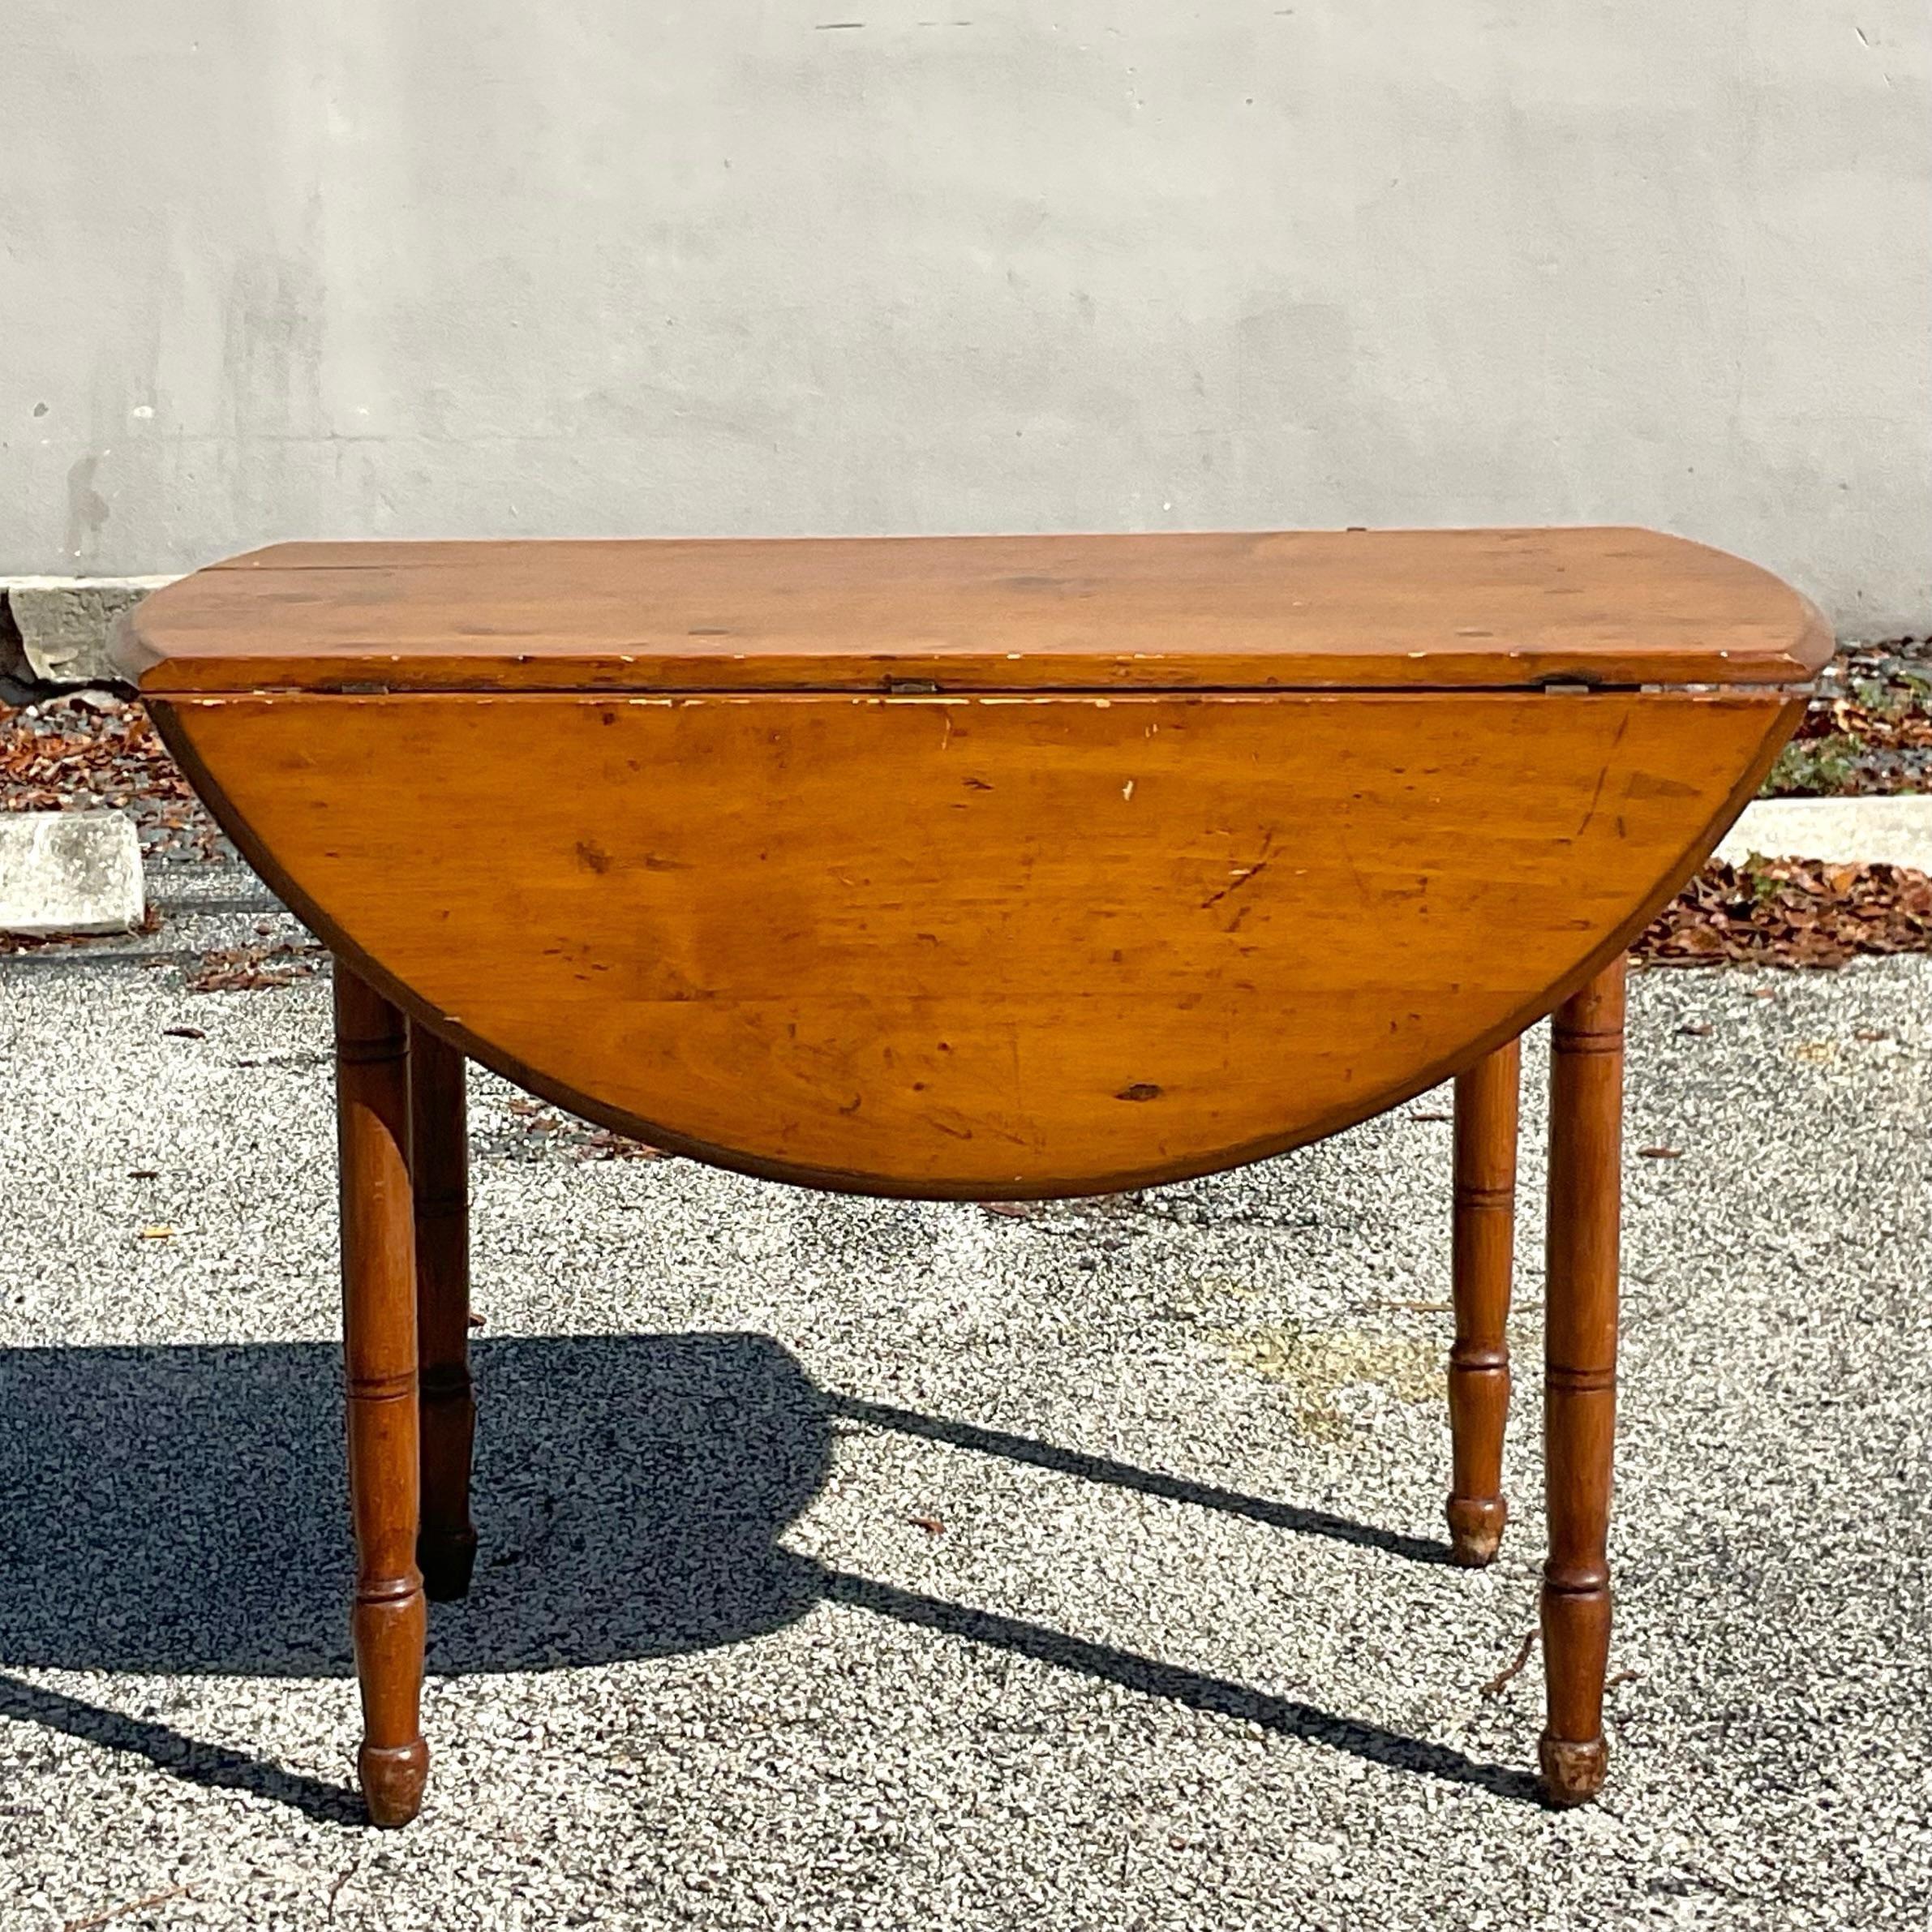 Early 20th Century Vintage Turned Leg Drop Leaf Table In Good Condition For Sale In west palm beach, FL